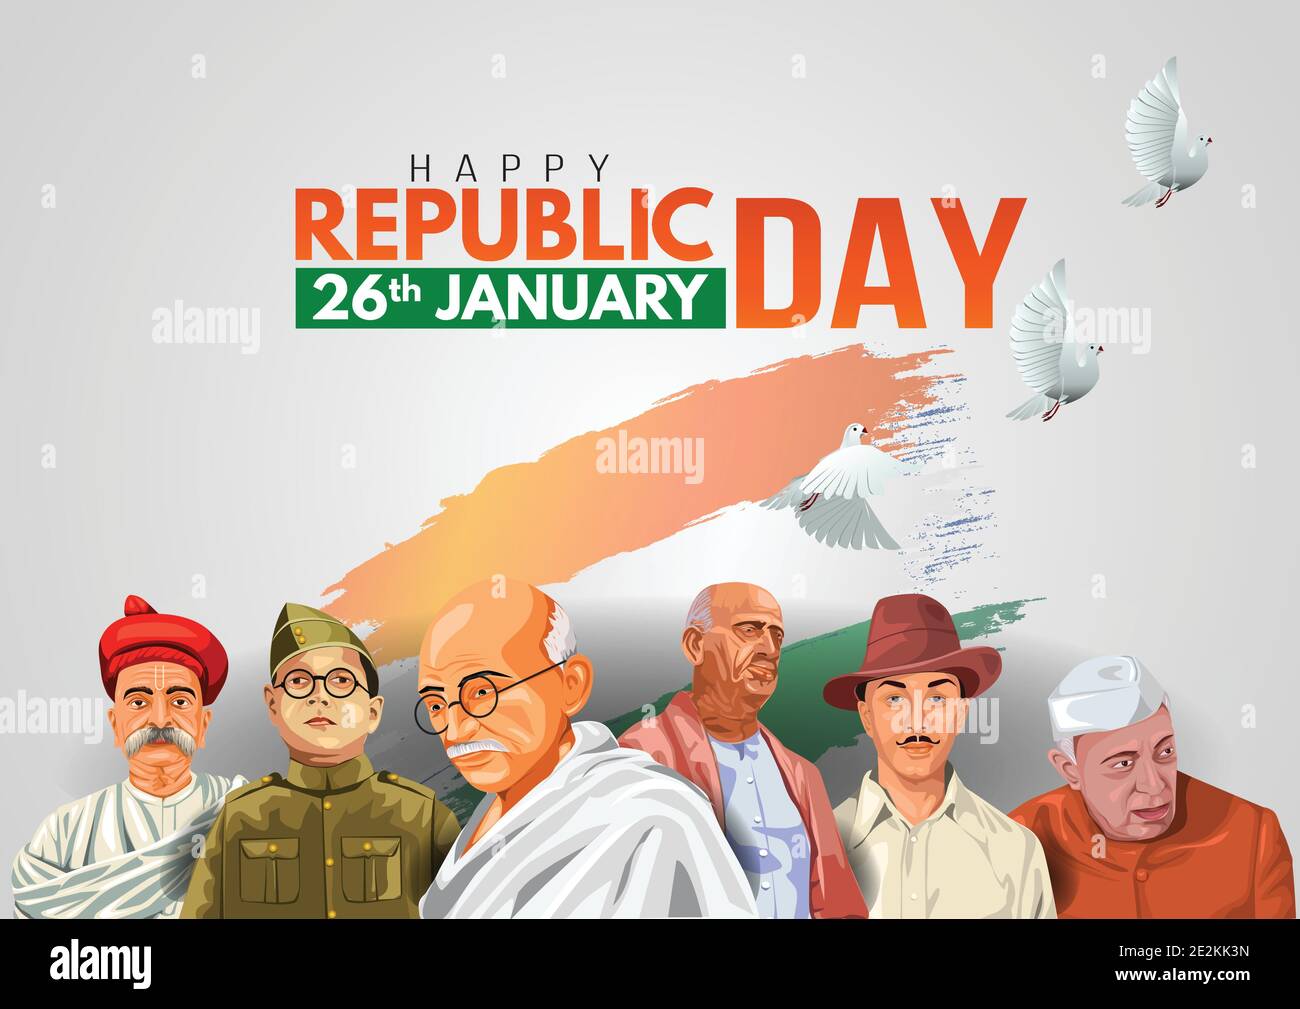 happy republic day India 26th January with Indian freedom fighters ...